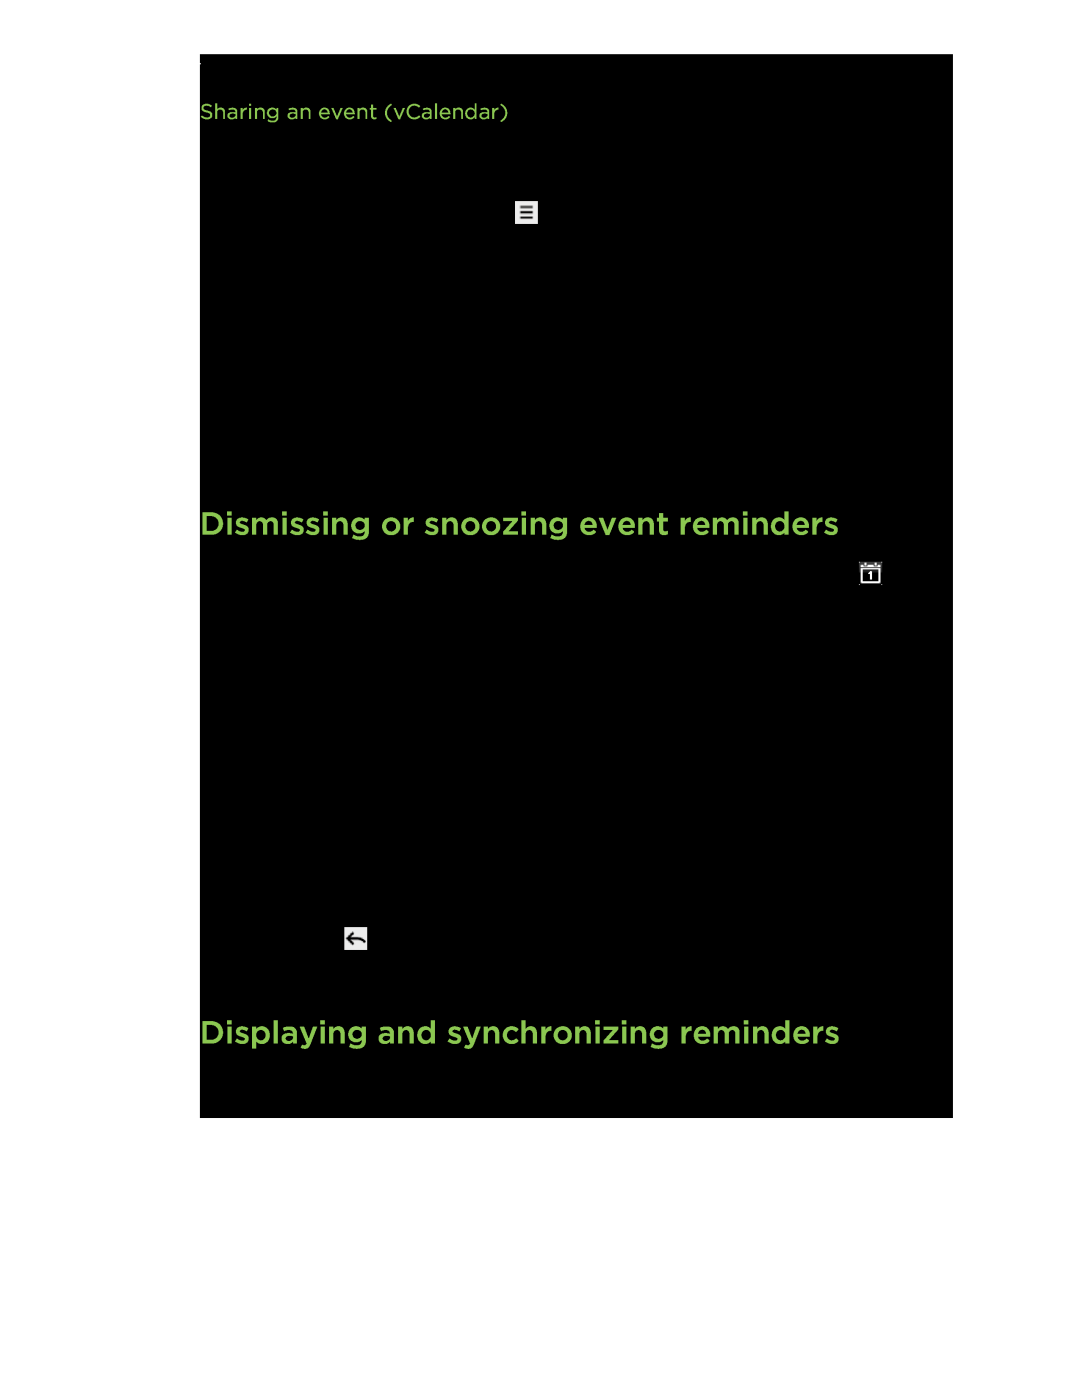 HTC manual Dismissing or snoozing event reminders, Displaying and synchronizing reminders, Sharing an event vCalendar 